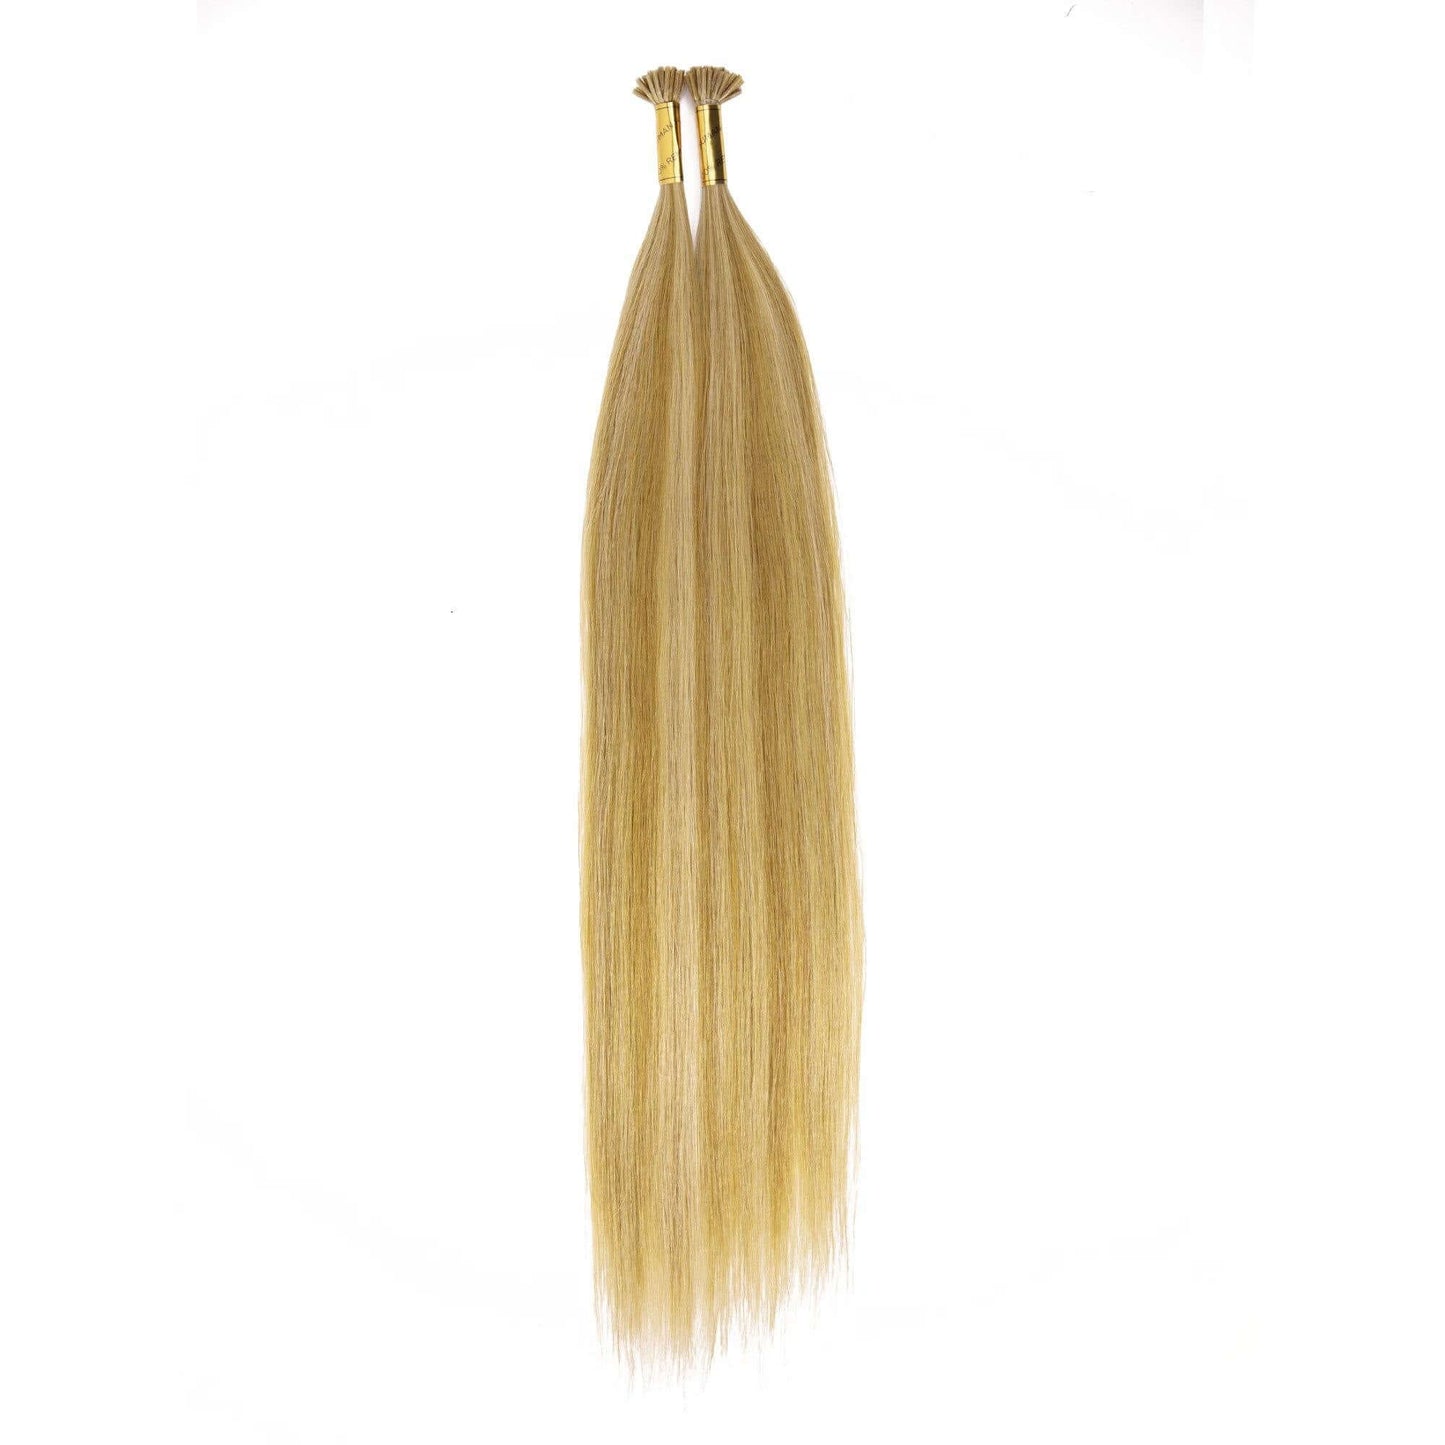 14" Bohyme Luxe - I-Tip - Silky Straight - 60pcs - H18/BL22 - BLIS60-14-H18/BL22